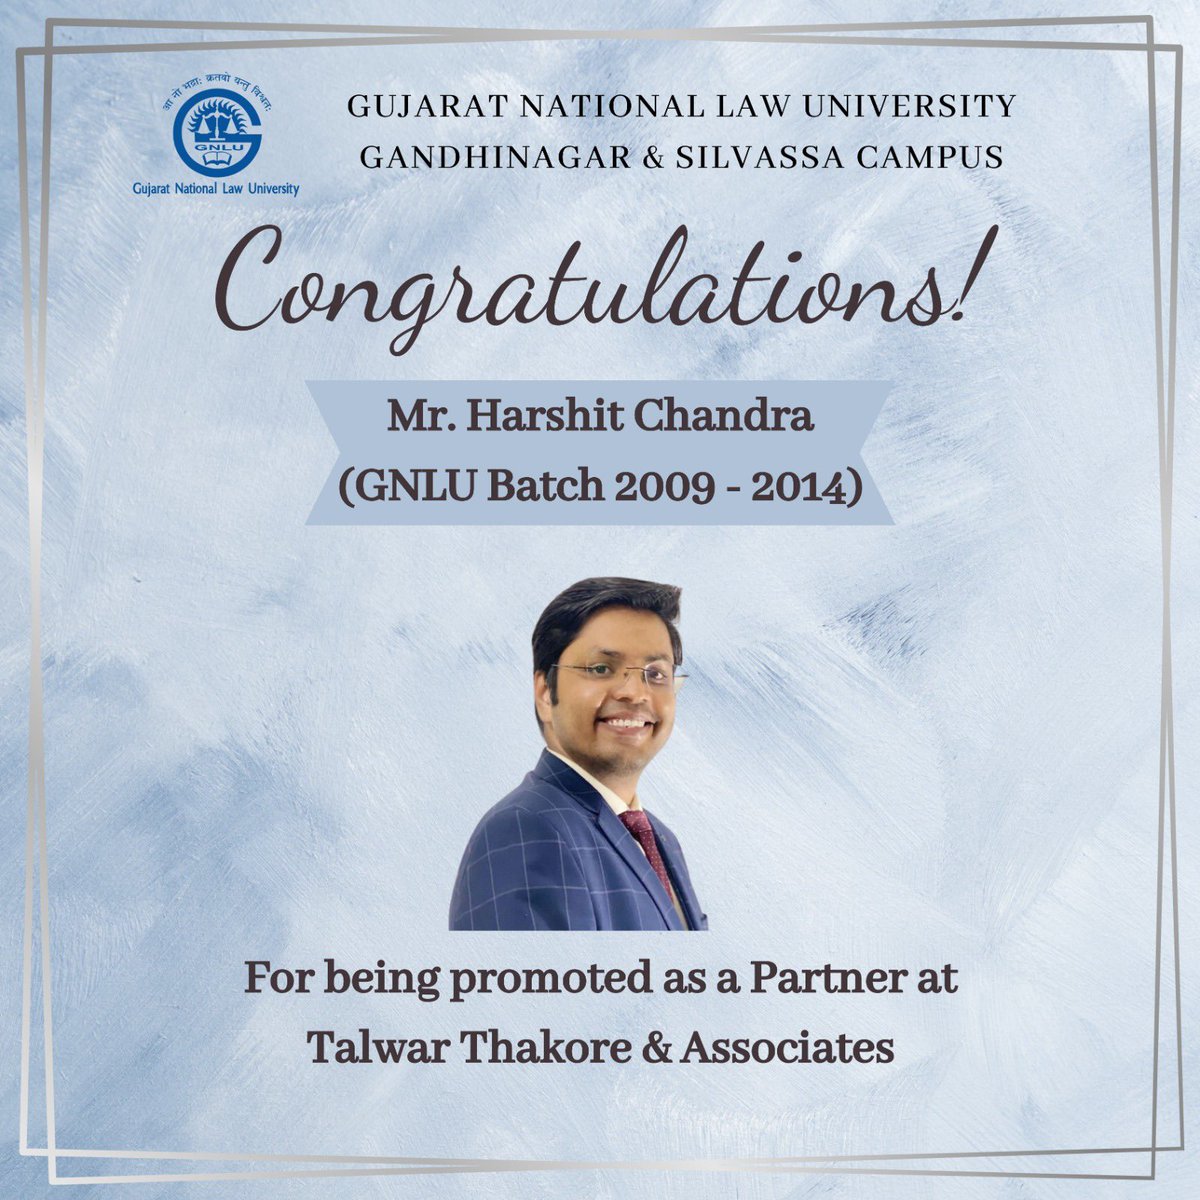 Heartiest congratulations to our alumnus, Mr. Harshit Chandra, Batch 2009-2014 for being promoted to Partner at Talwar Thakore & Associates (TT&A). We are extremely proud and wish him all the success in his future ventures!